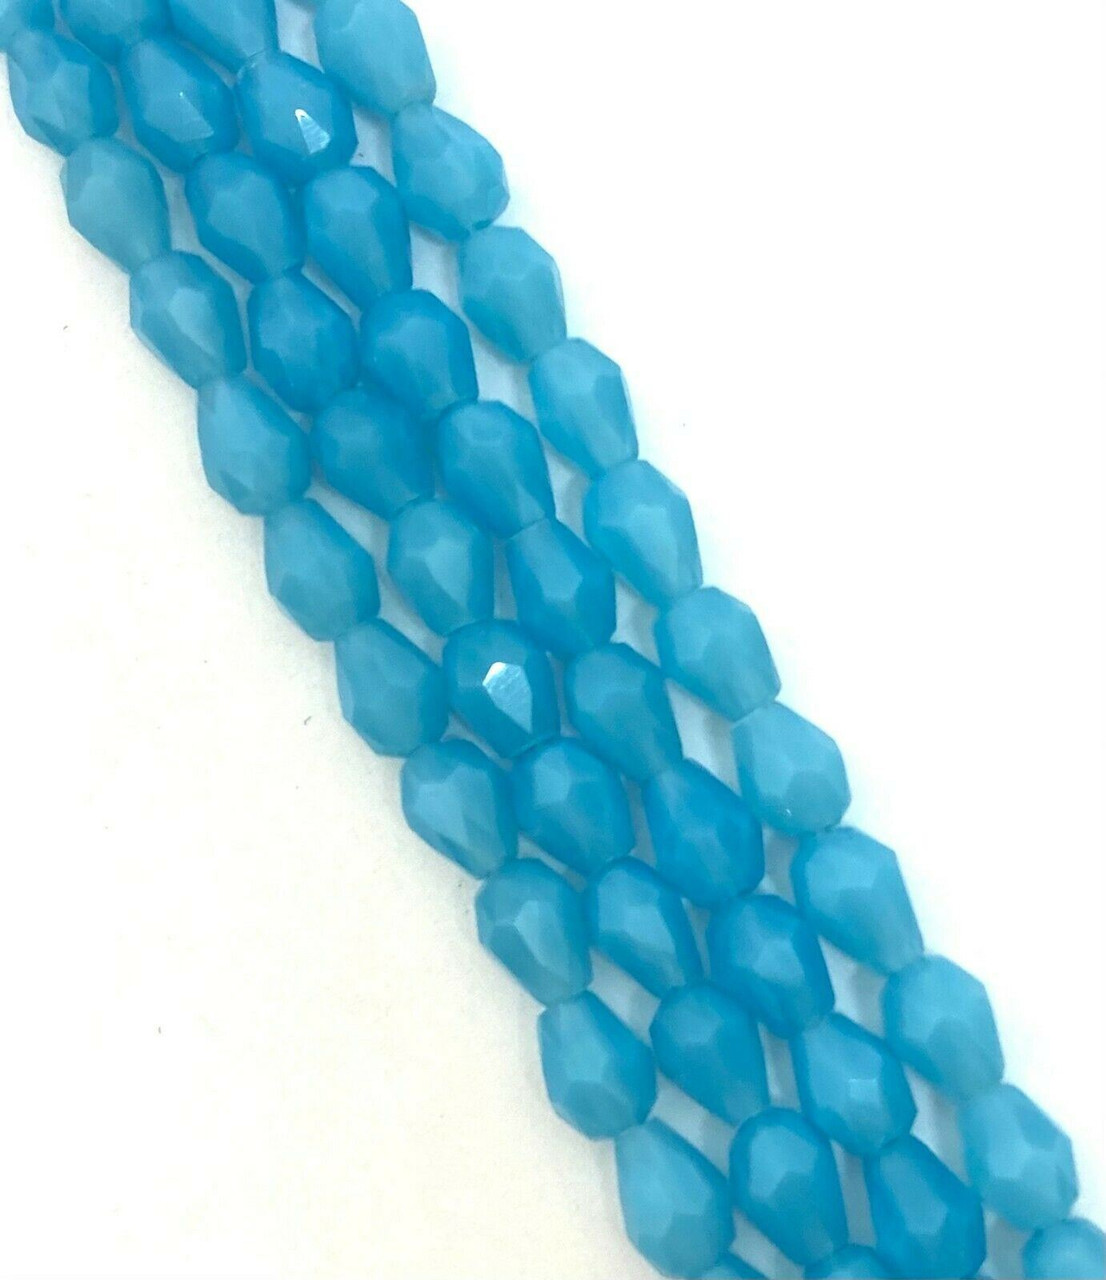 Strand of faceted drop glass beads (briolettes) - approx 11x7mm, Mid Blue Translucent, approx 72 beads